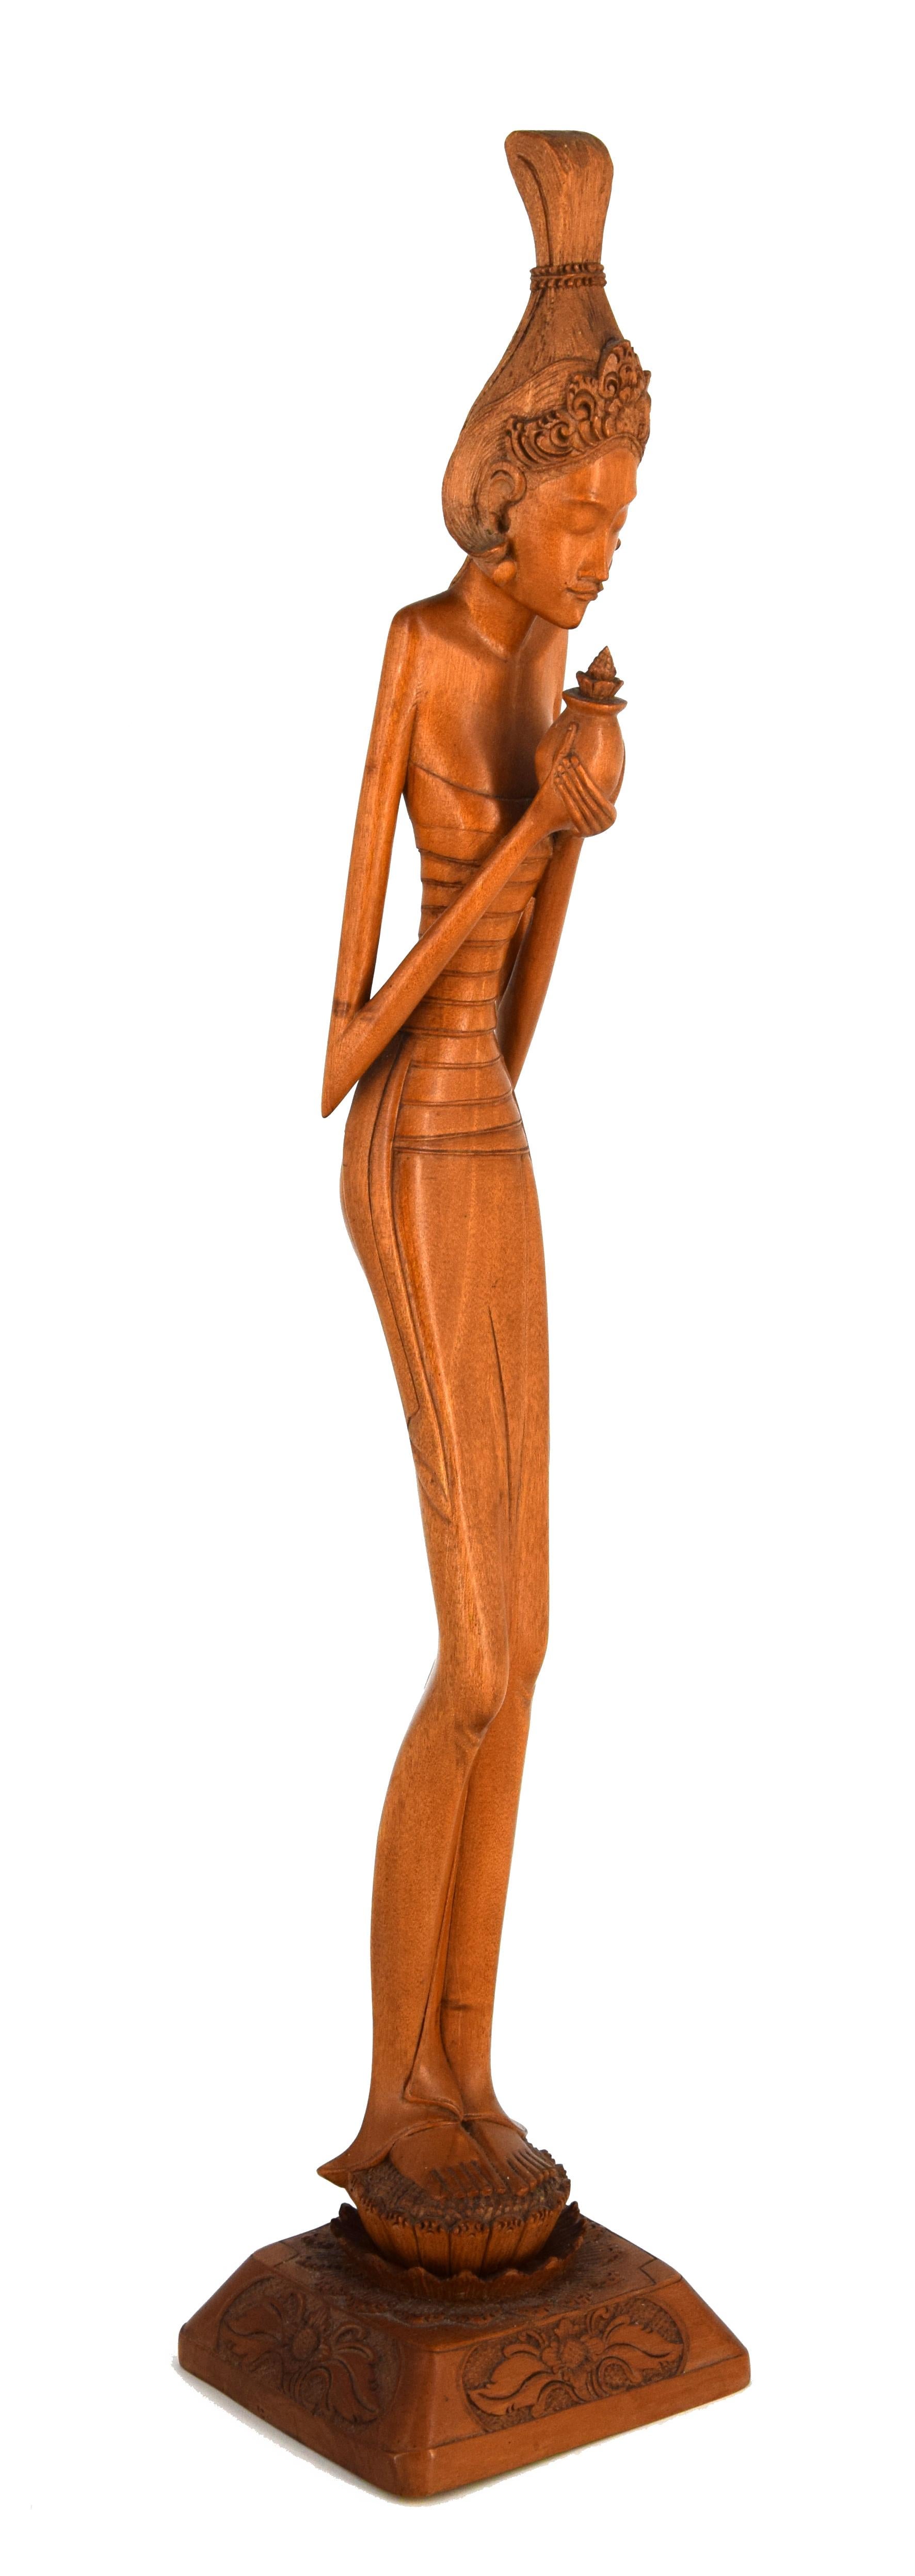 Indonesian Wooden Sculpture of Woman from Bali